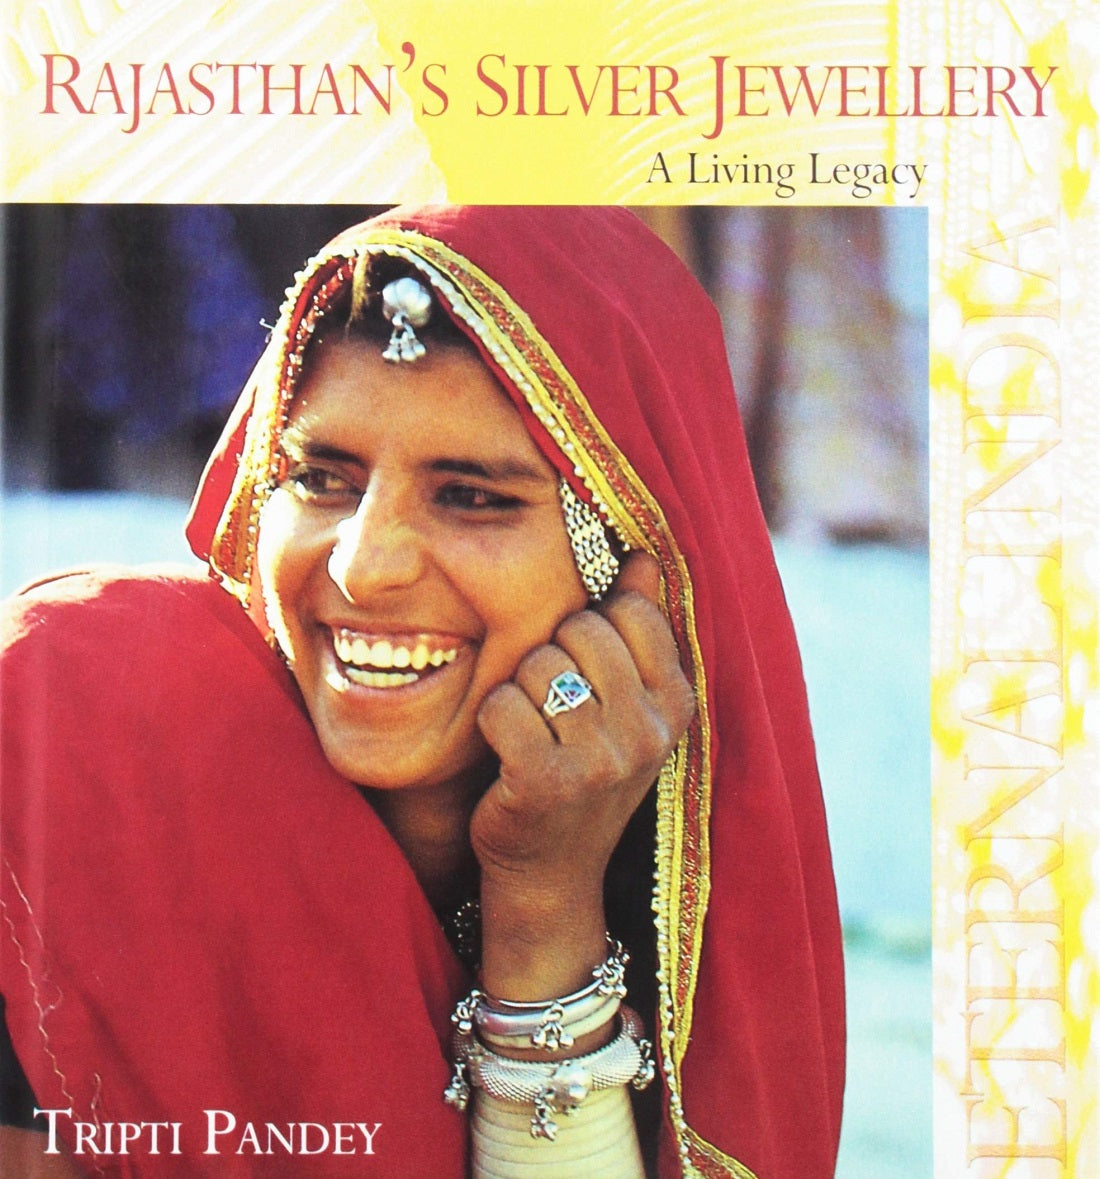 Book　RAJASTHAN　SILVER　JEWELLERY　Online　available　at